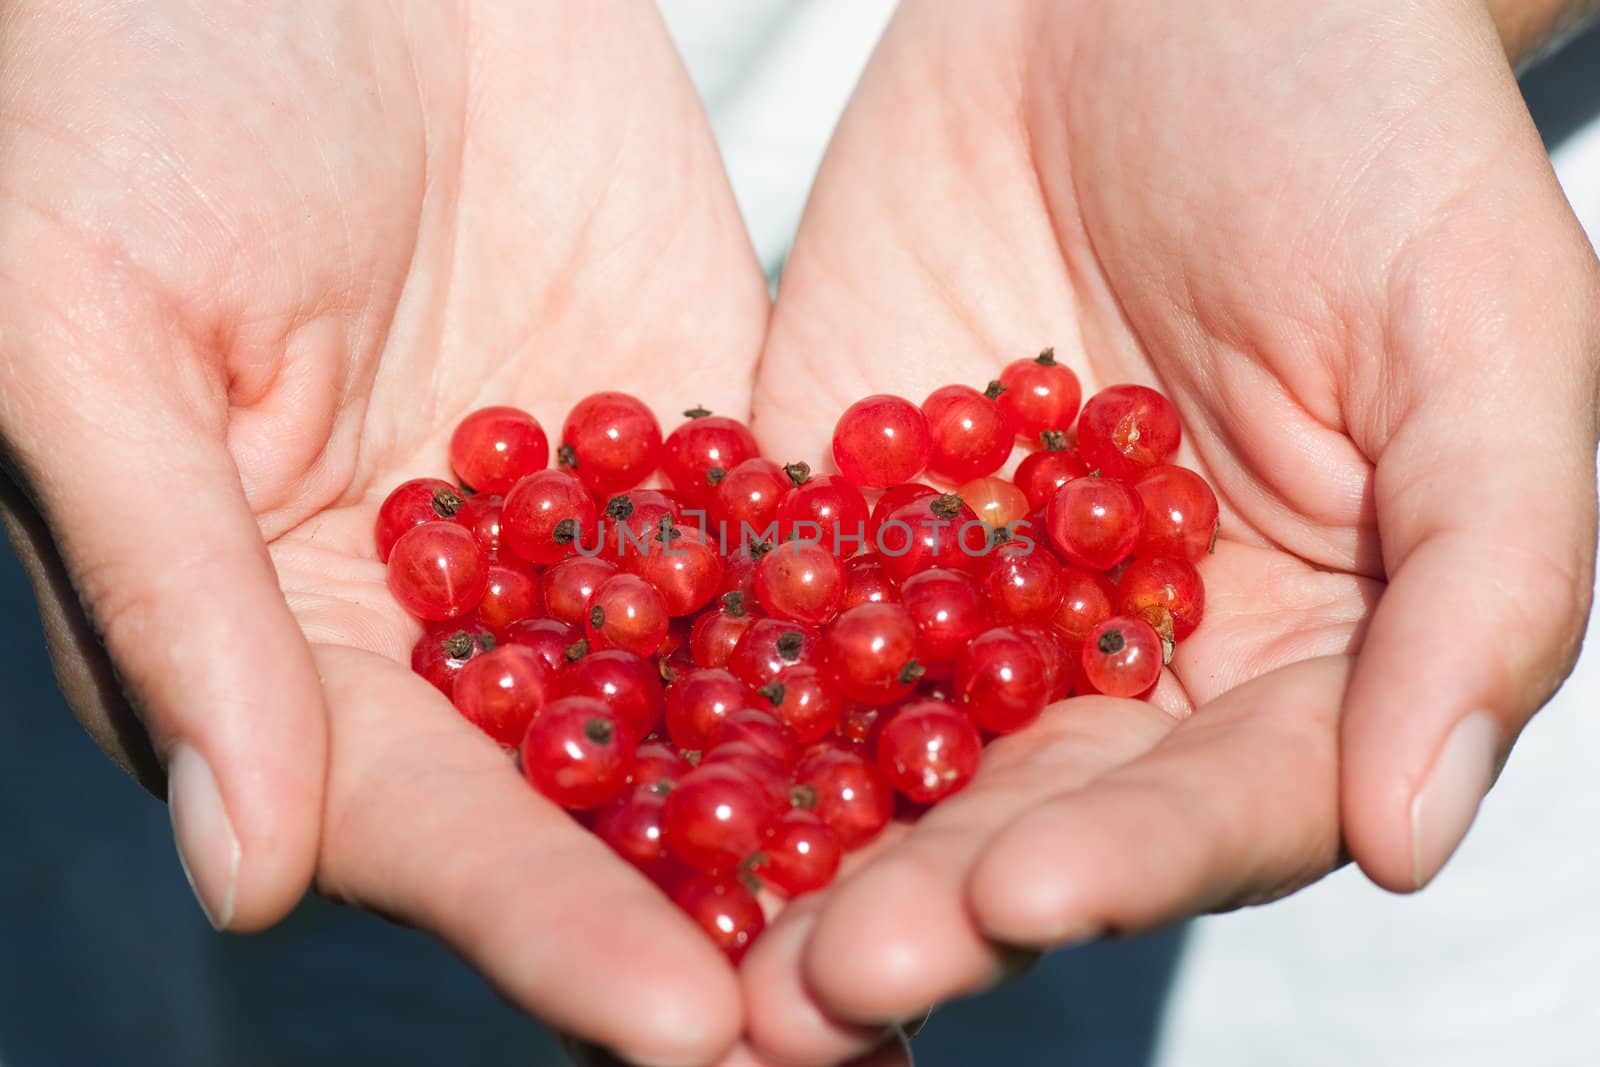 Hands holding currants in the shape of a heart